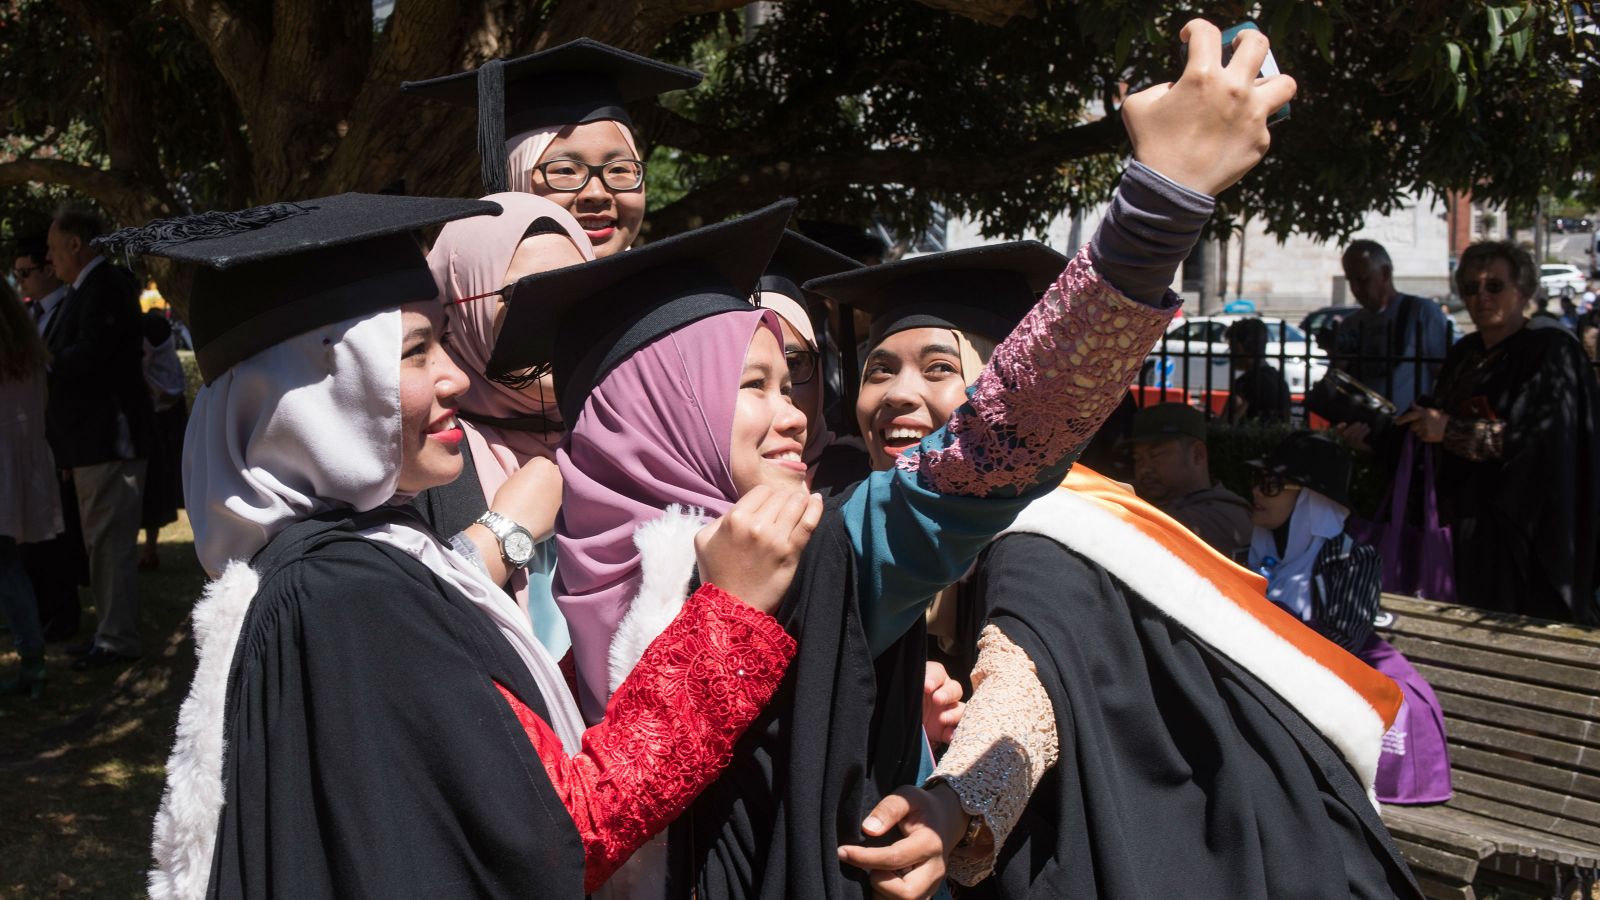 A group of international students dress in their graduation robes, smile together for a selfie.